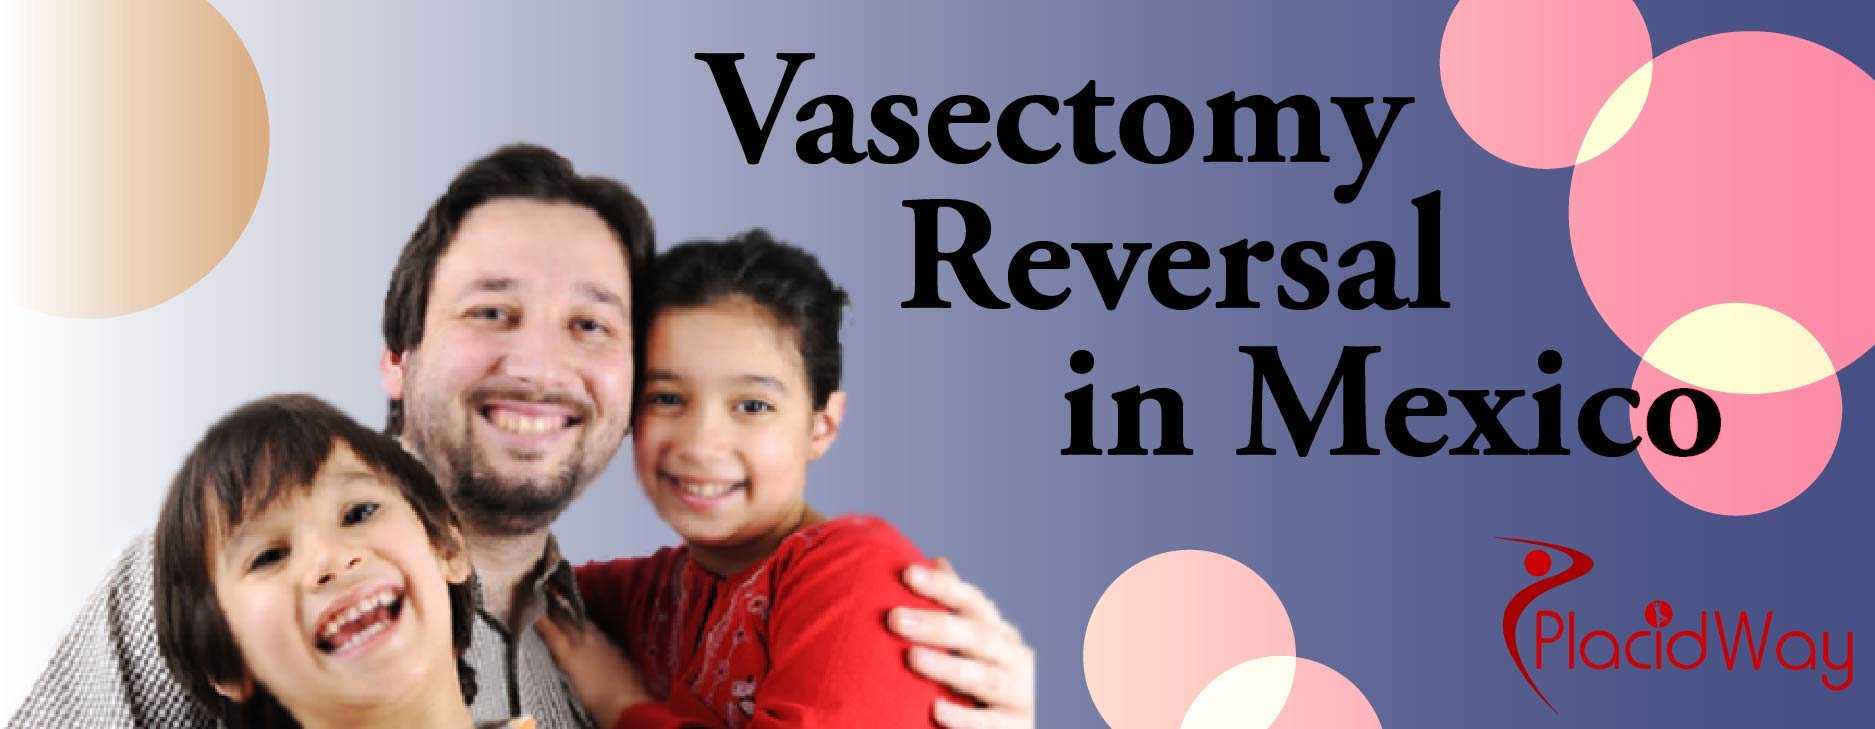 Vasectomy Reversal in Mexico Package